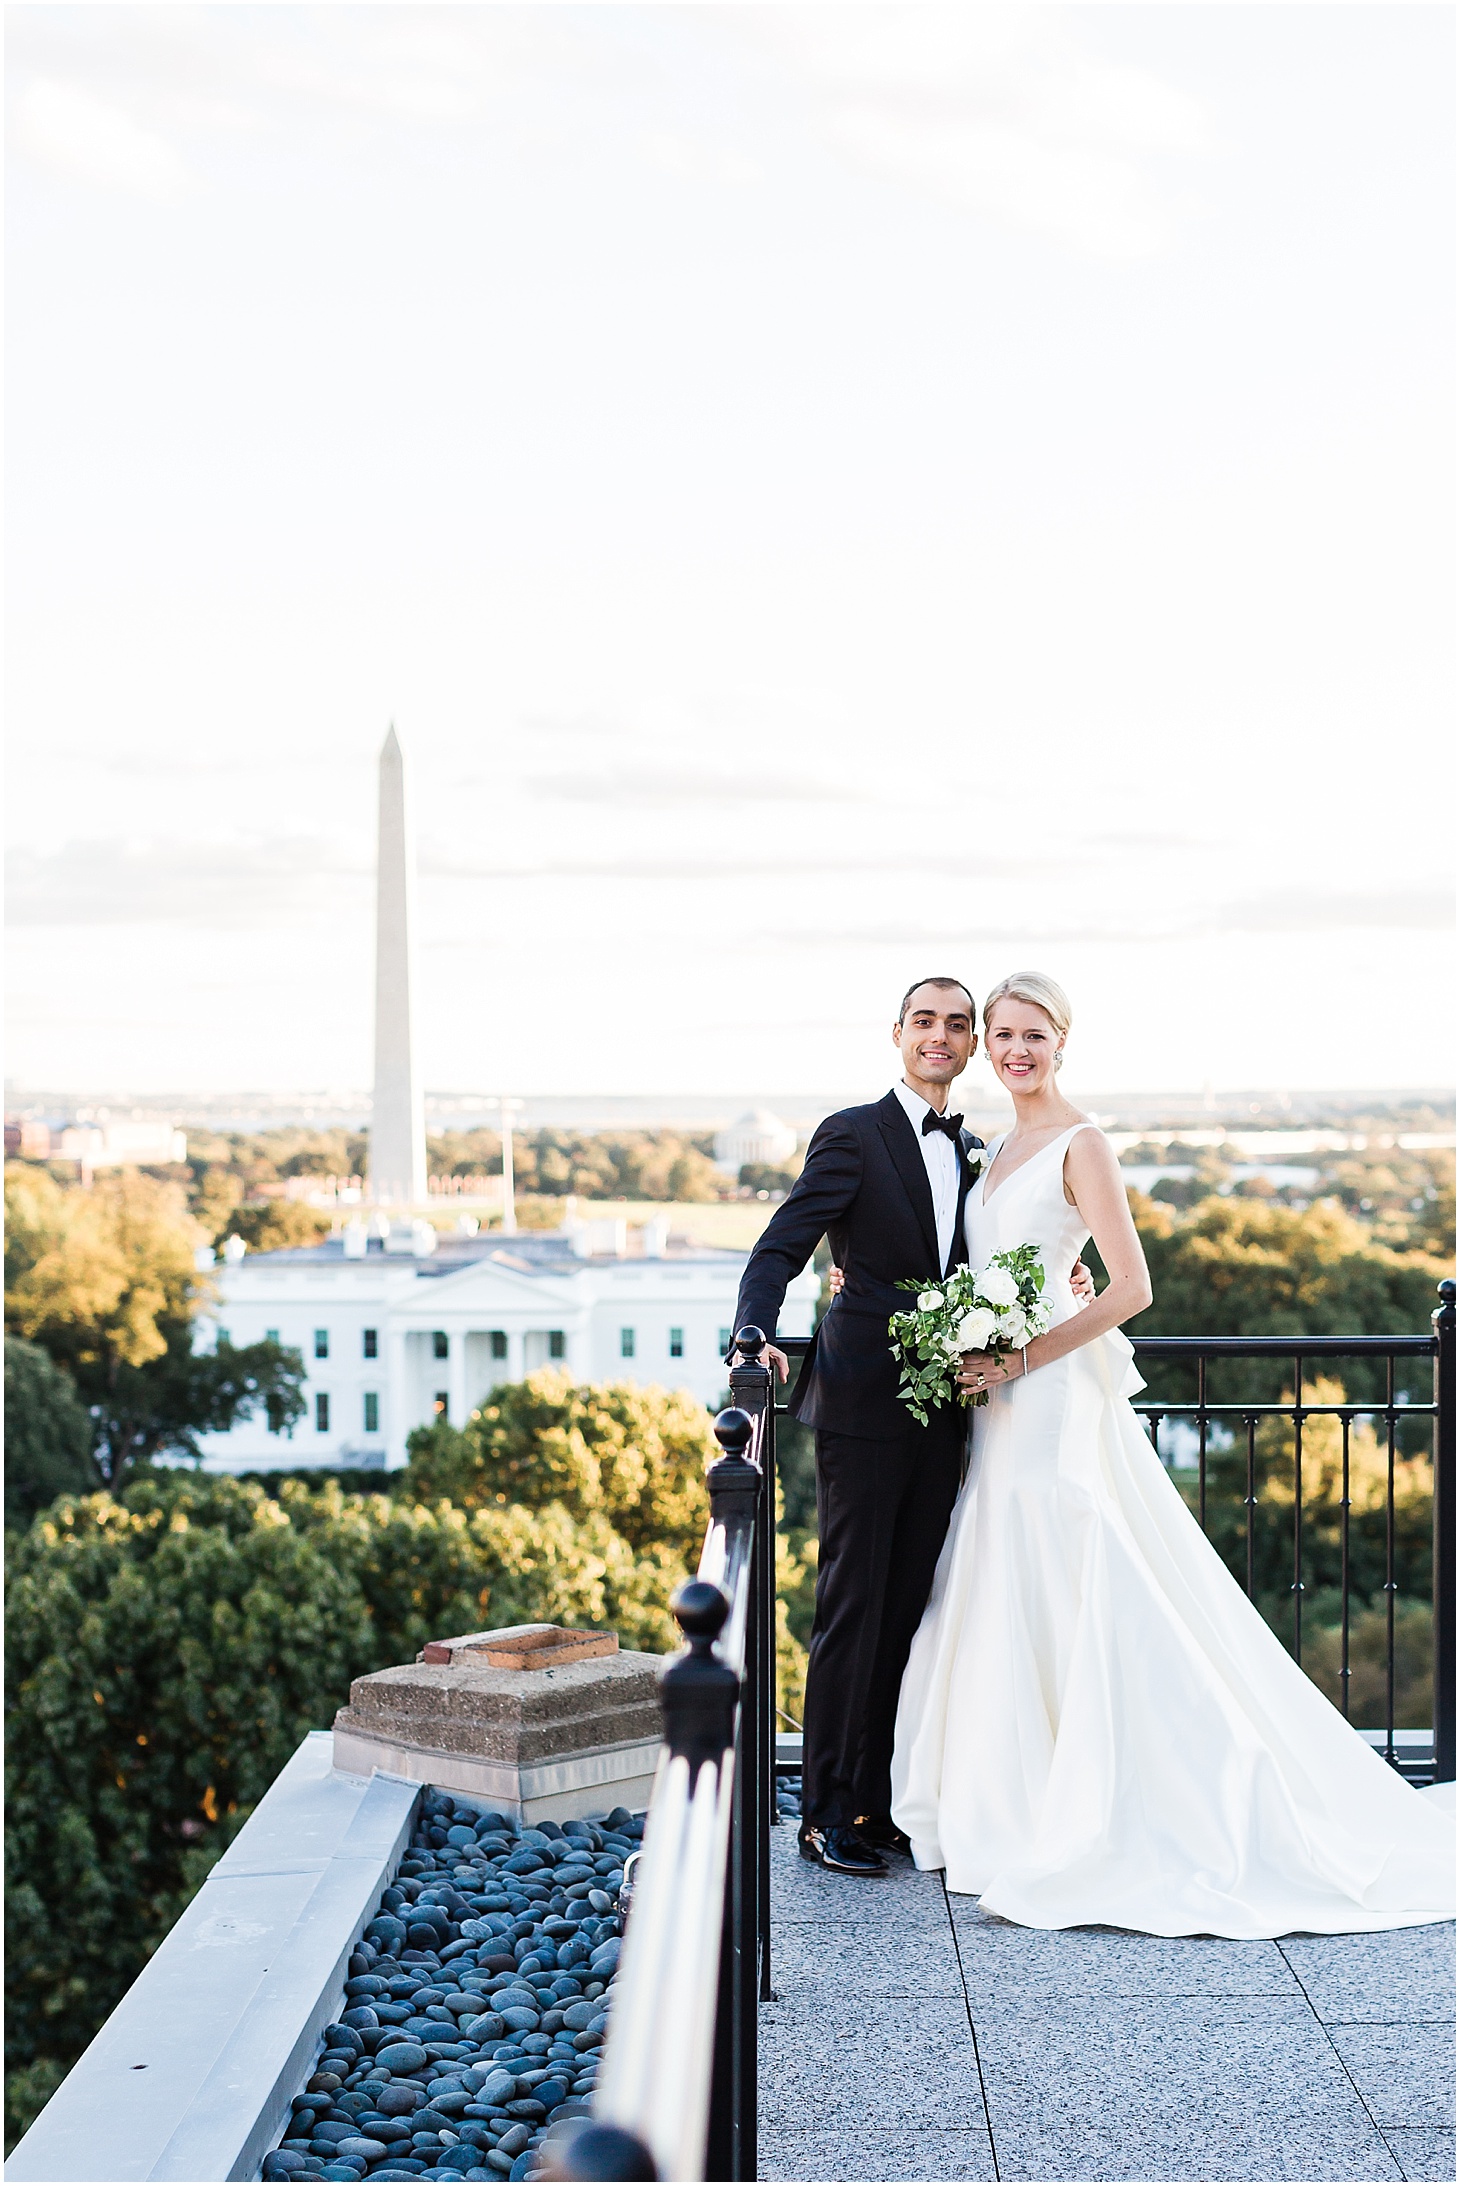 Wedding Portraits at Top of the Hay, Champagne-toned Multicultural Wedding at Hay-Adams Hotel, Sarah Bradshaw Photography